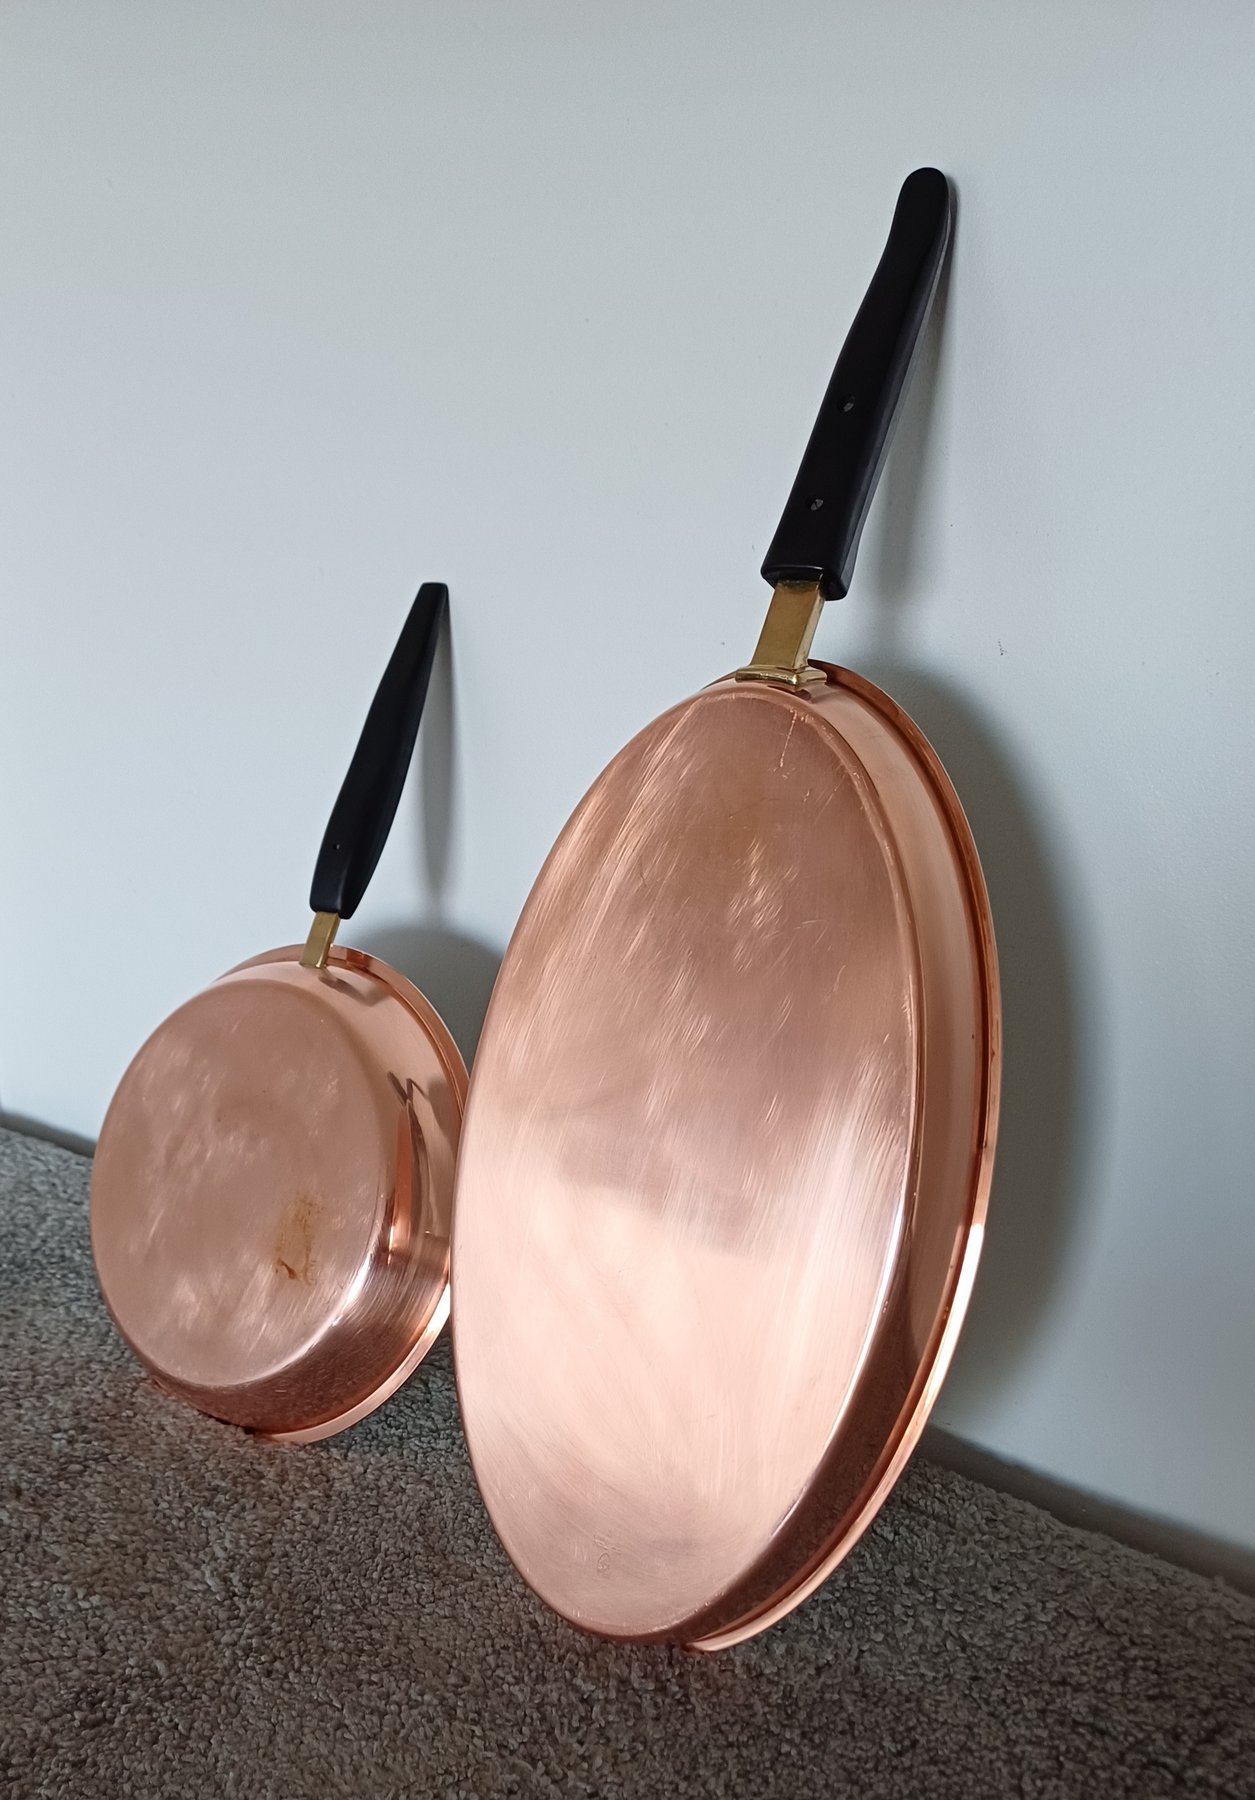 28-centimeter frying pan made of copper and stainless steel from Belgium